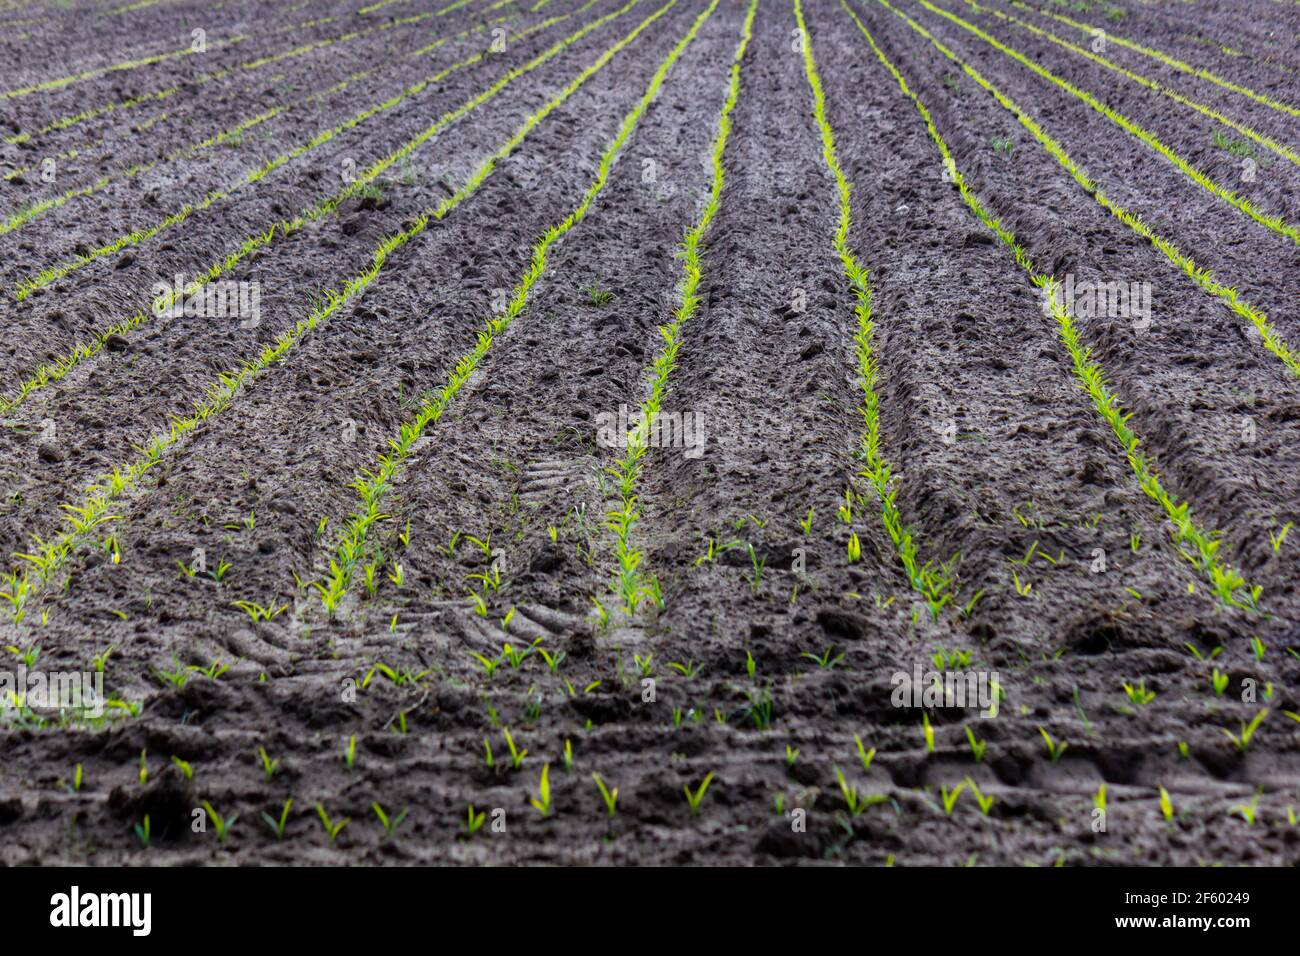 Rows of newly planted corn during spring (Malle, Belgium) Stock Photo